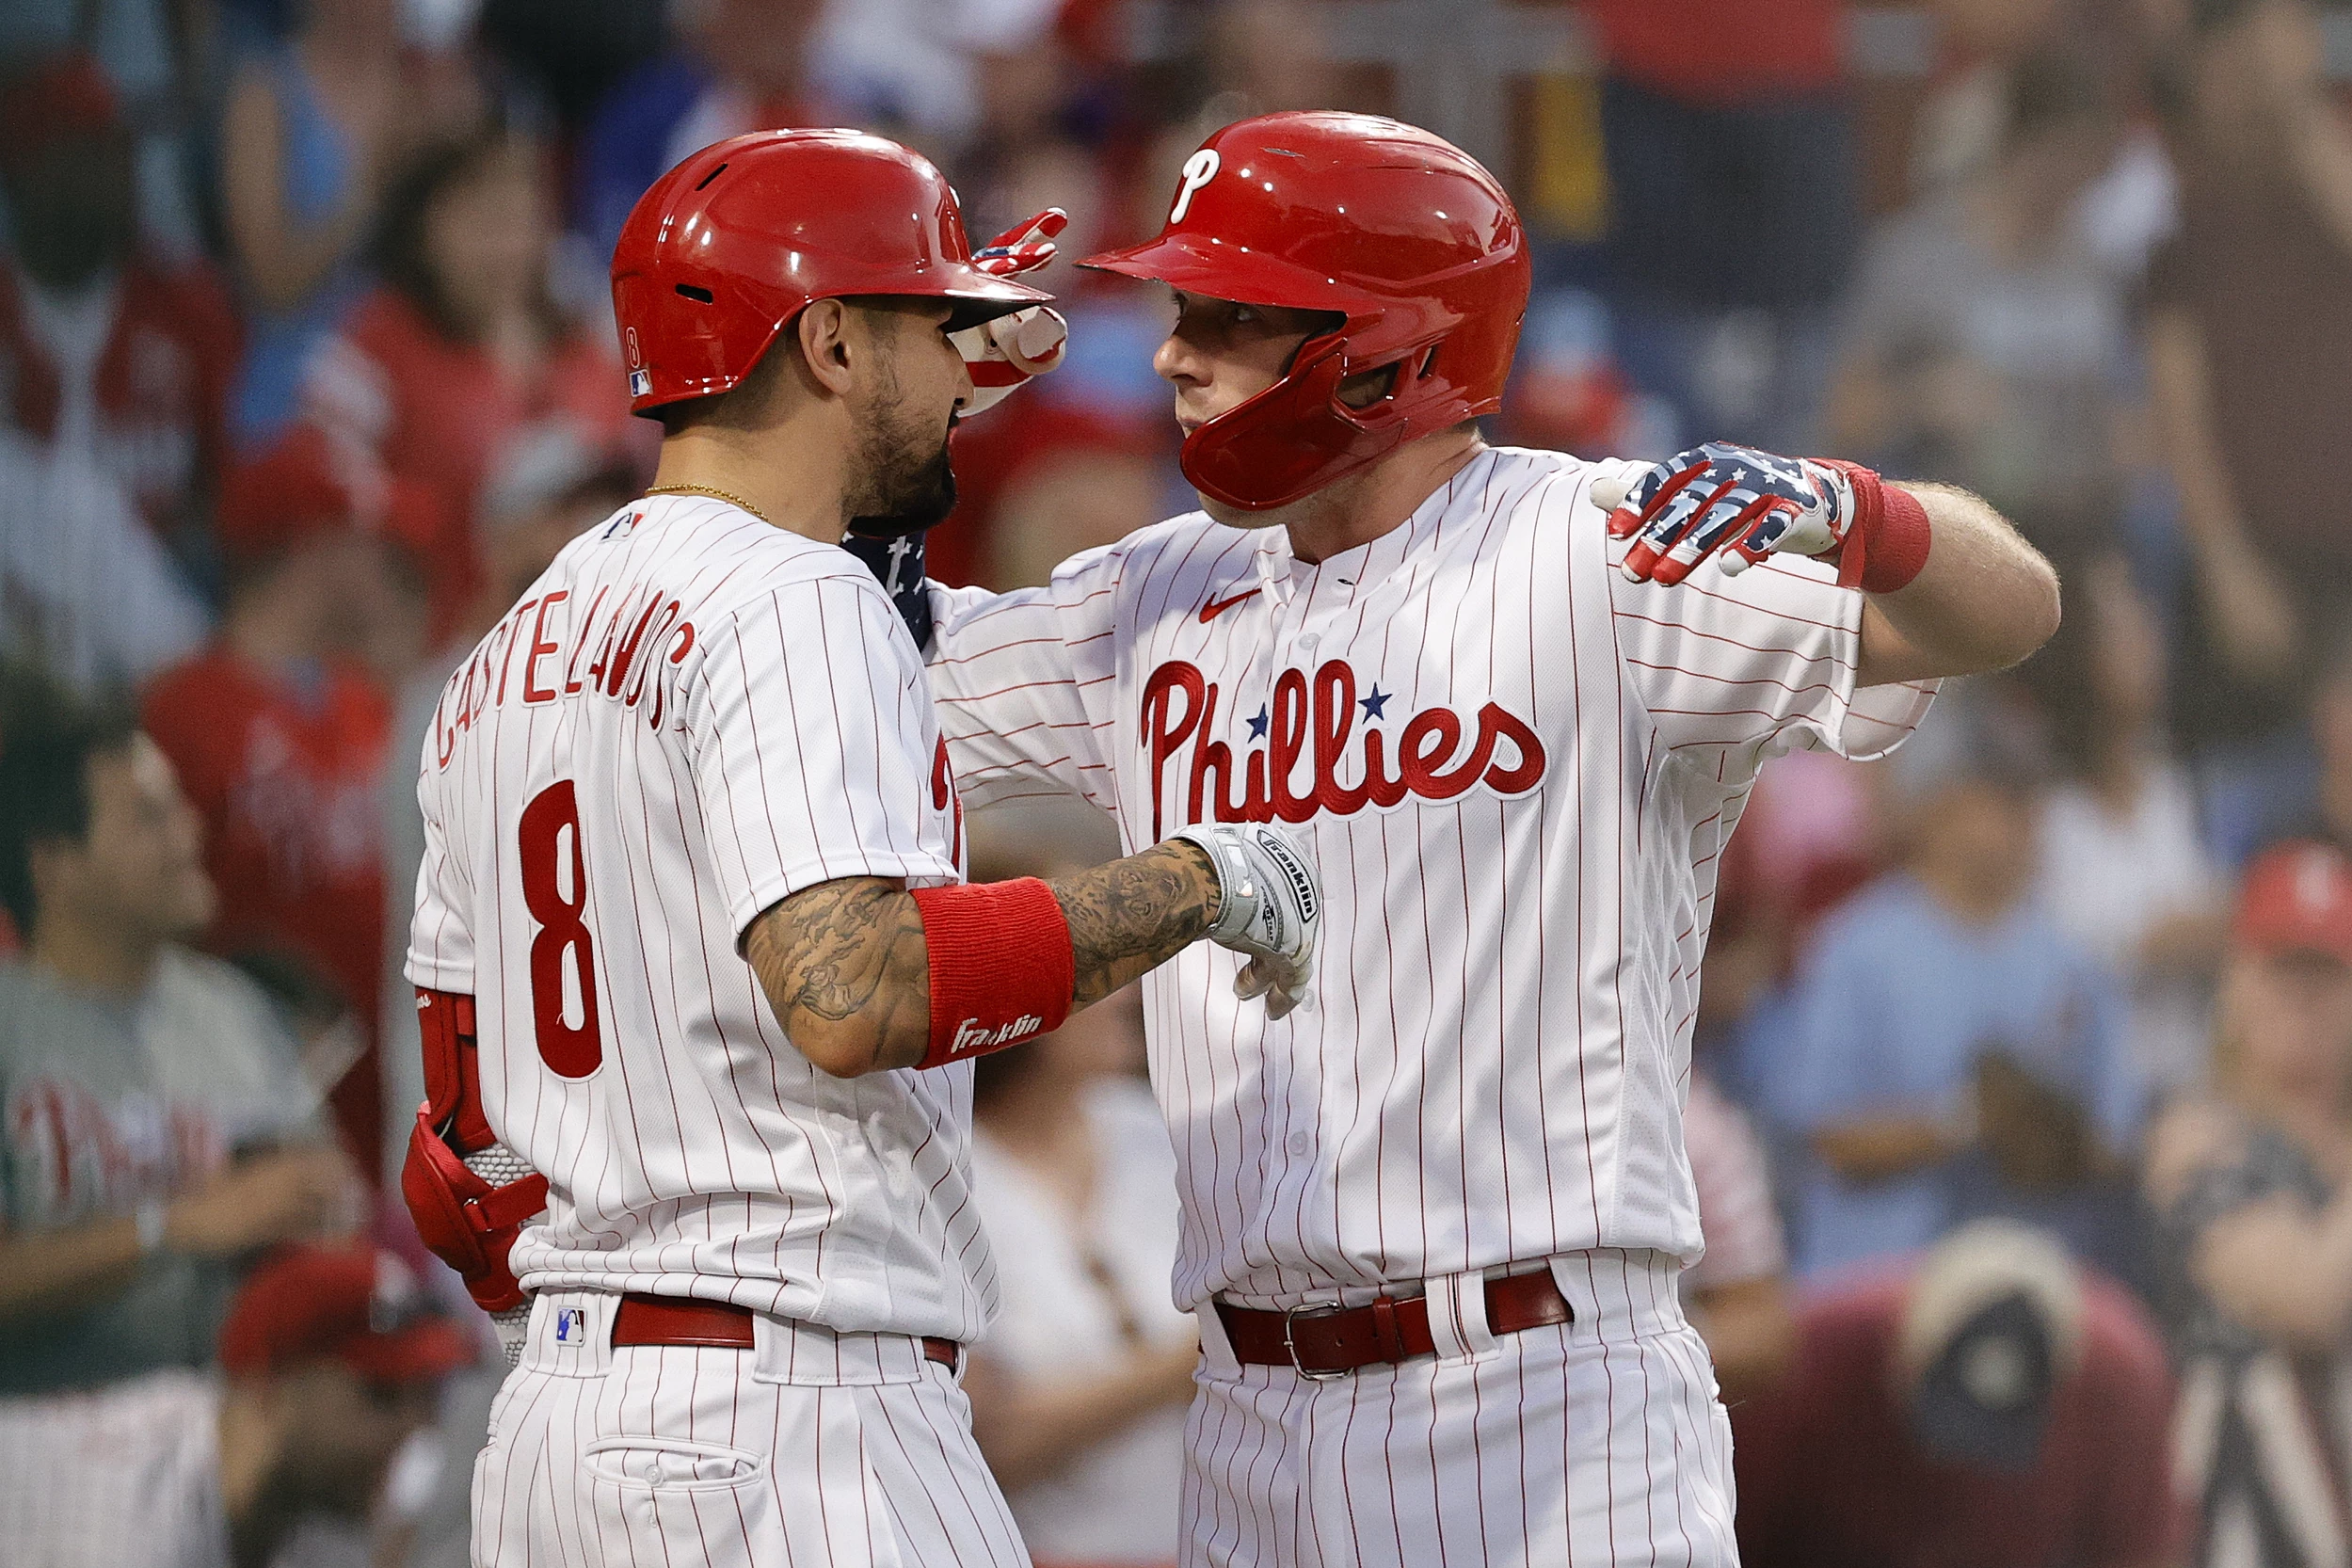 NJ Family Gets Epic 'Thank You' From Phillies Player Rhys Hoskins